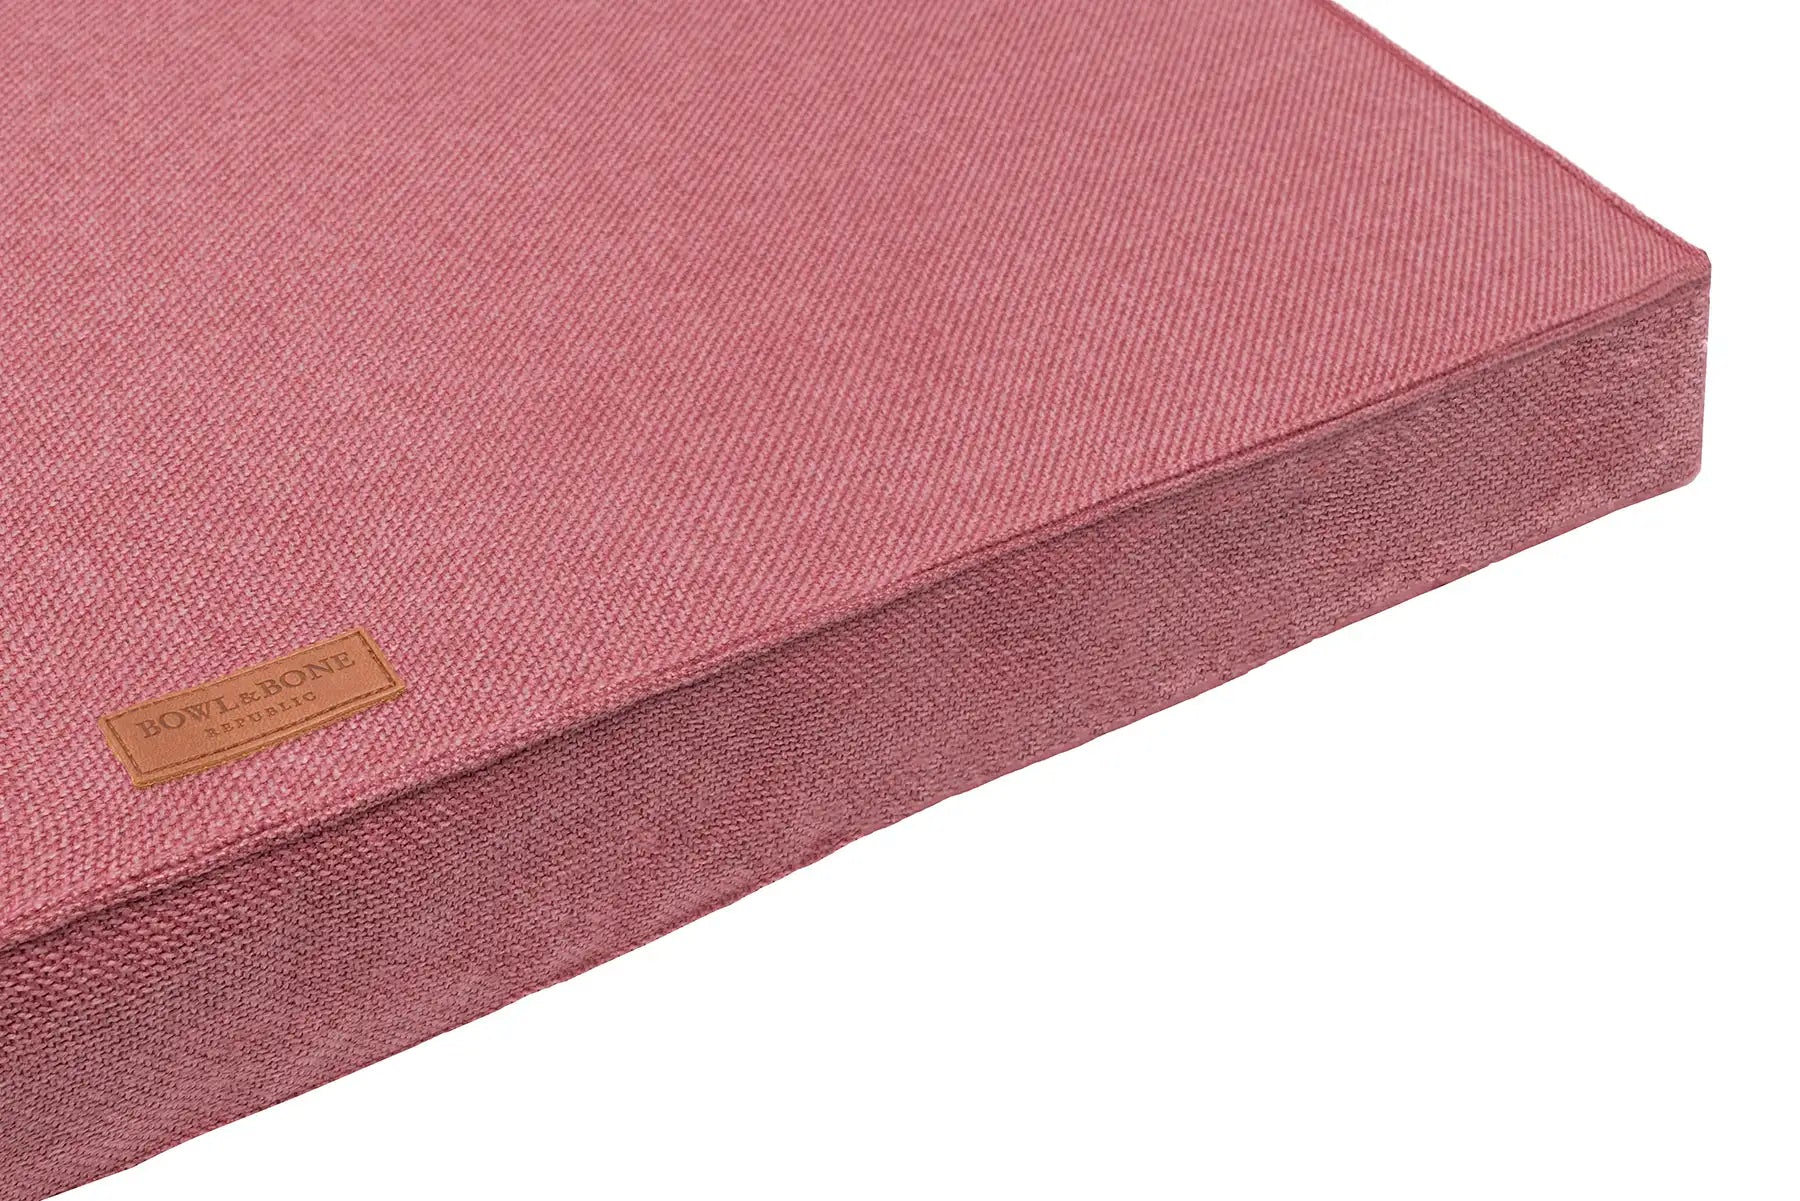 Orthopaedic Mattress Dog Bed Bliss Pink from Bowl&Bone